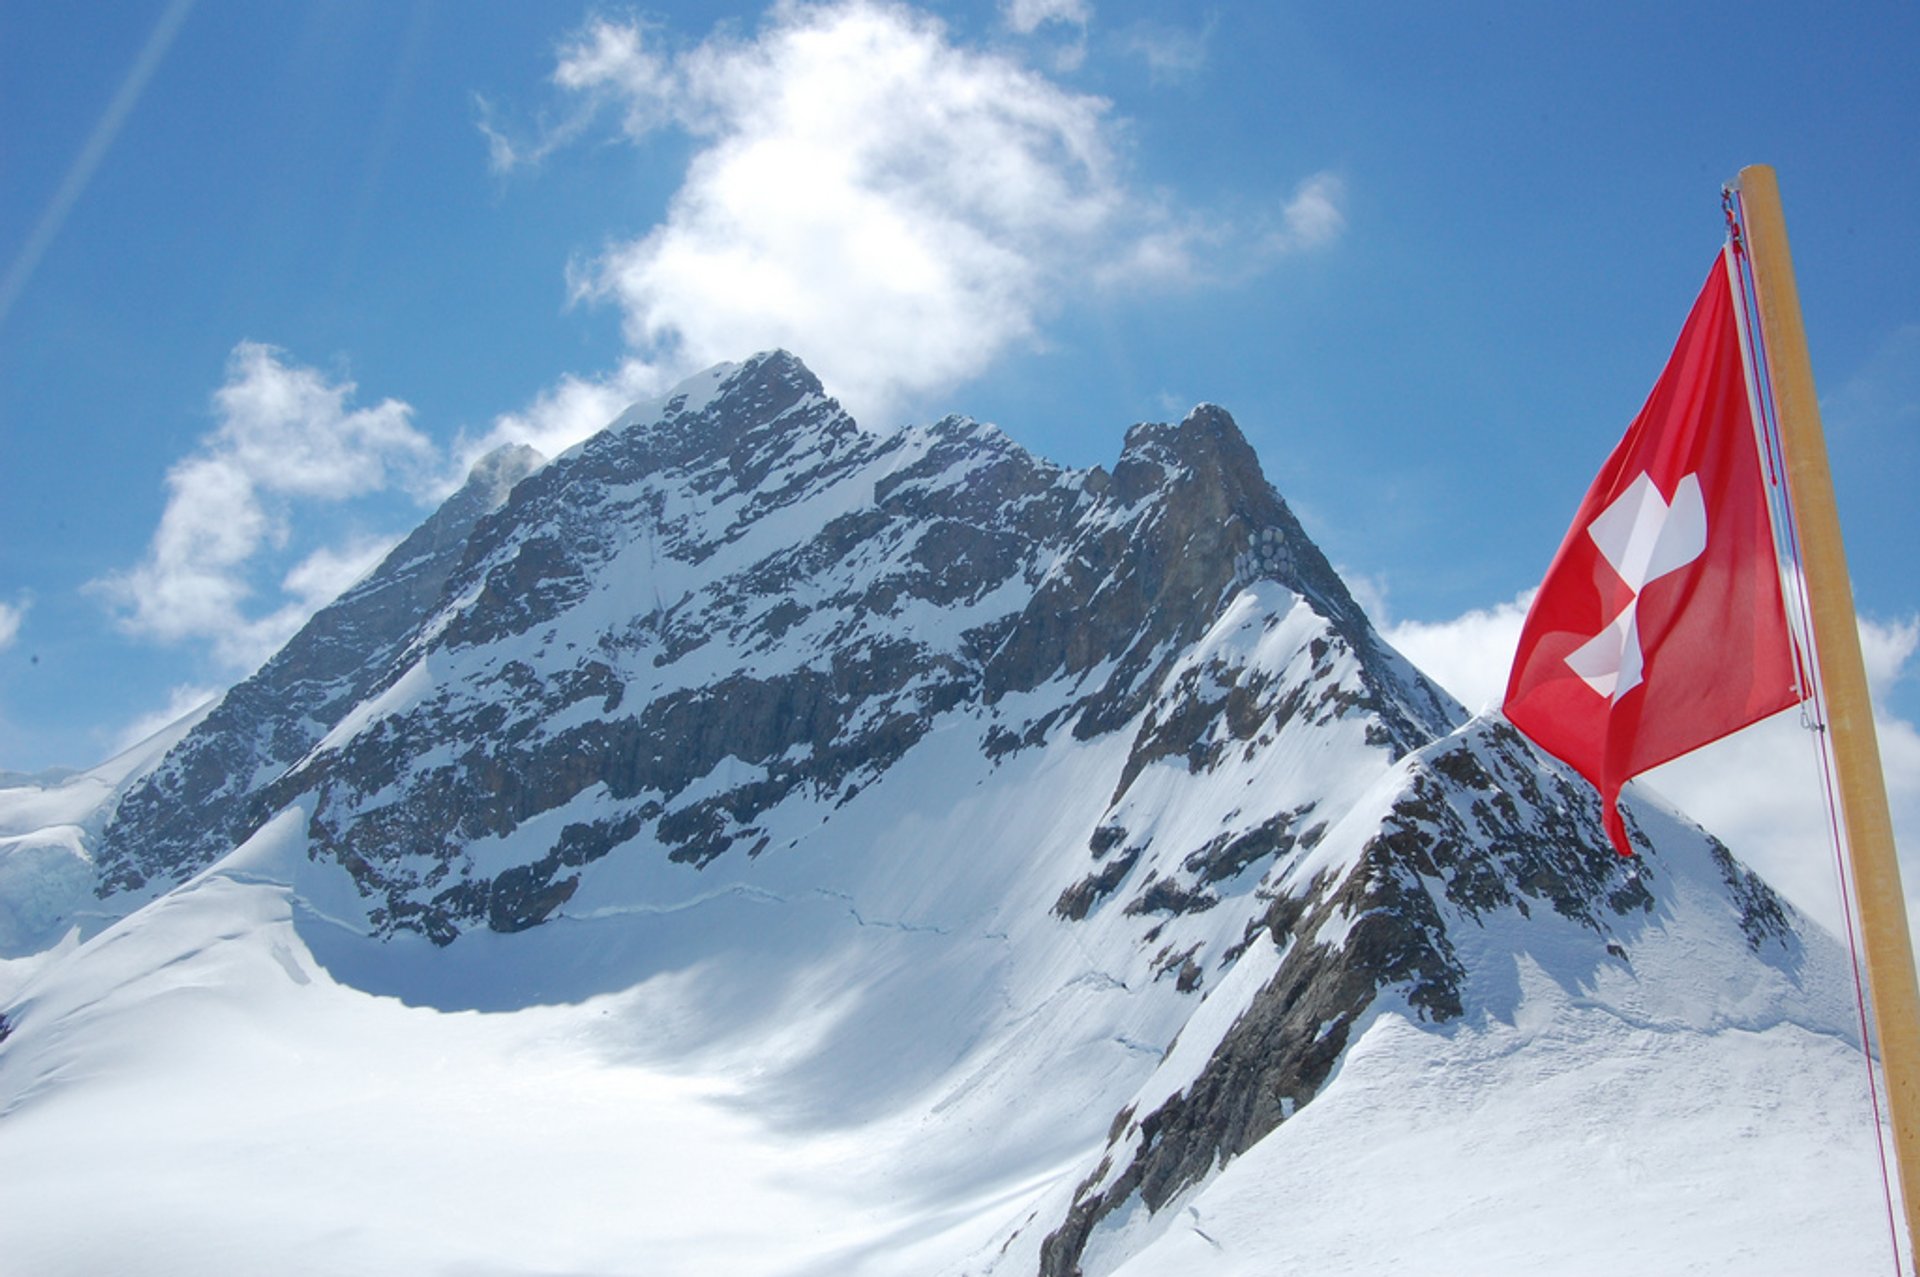 Jungfraujoch and the Sphinx Observatory